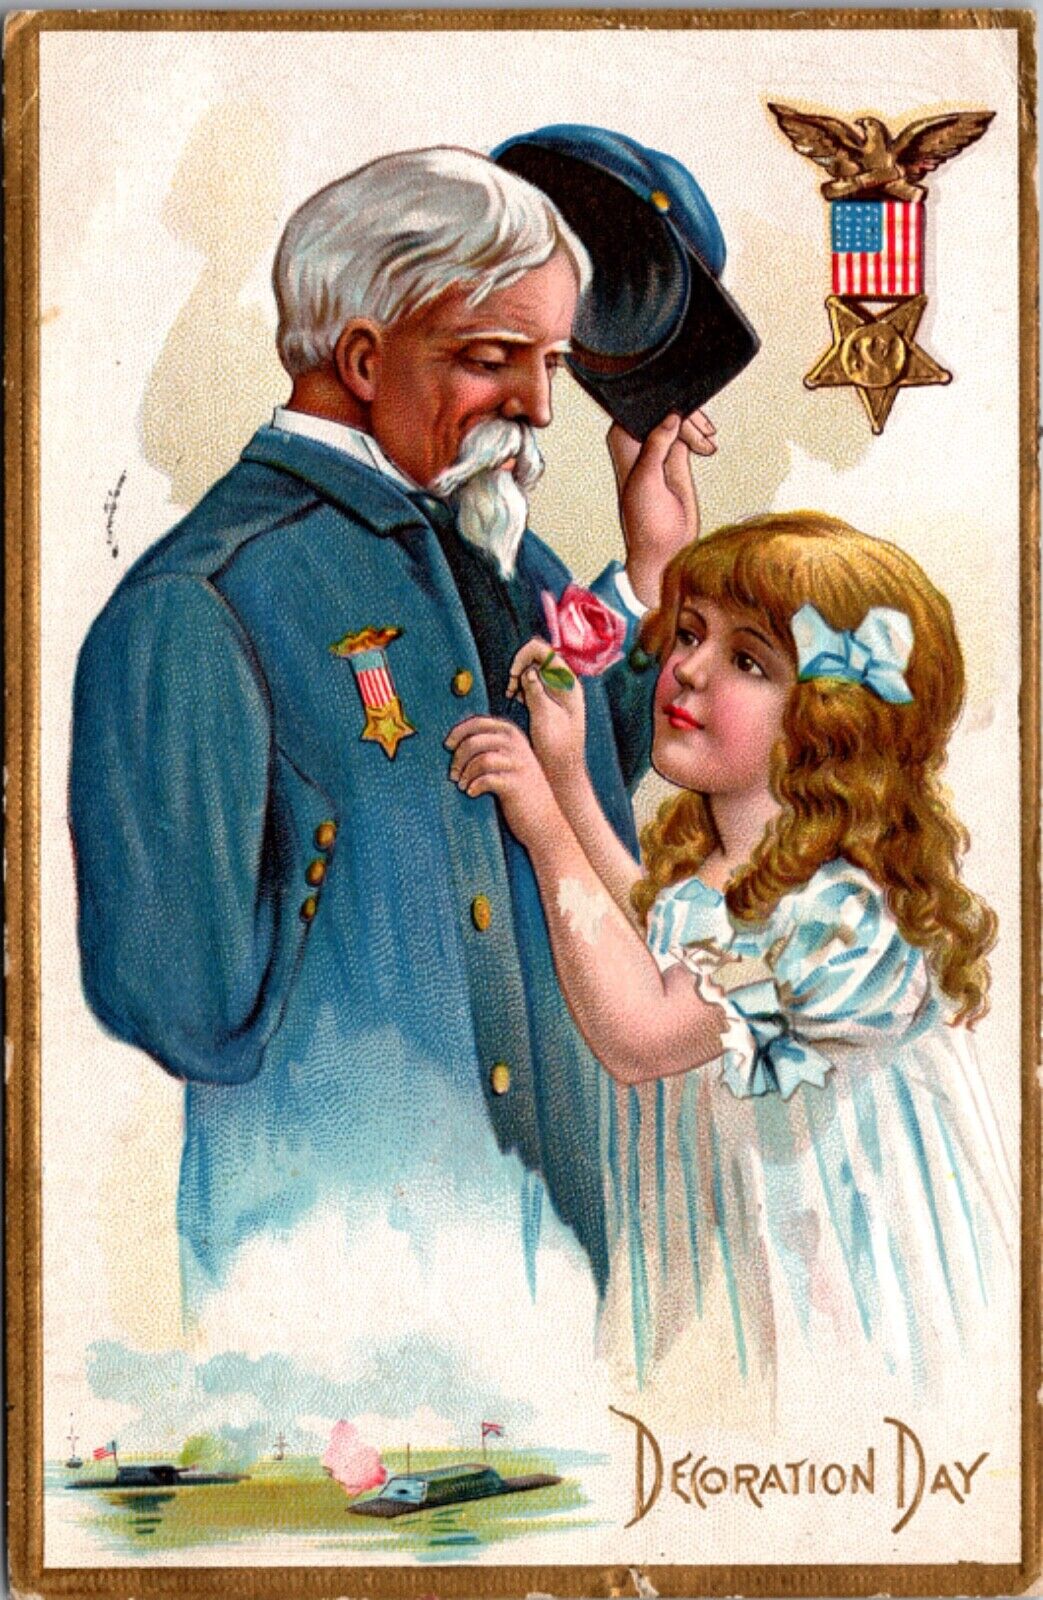 Decoration Day Postcard Little Girl Giving Pink Rose to Soldier Missing Arm